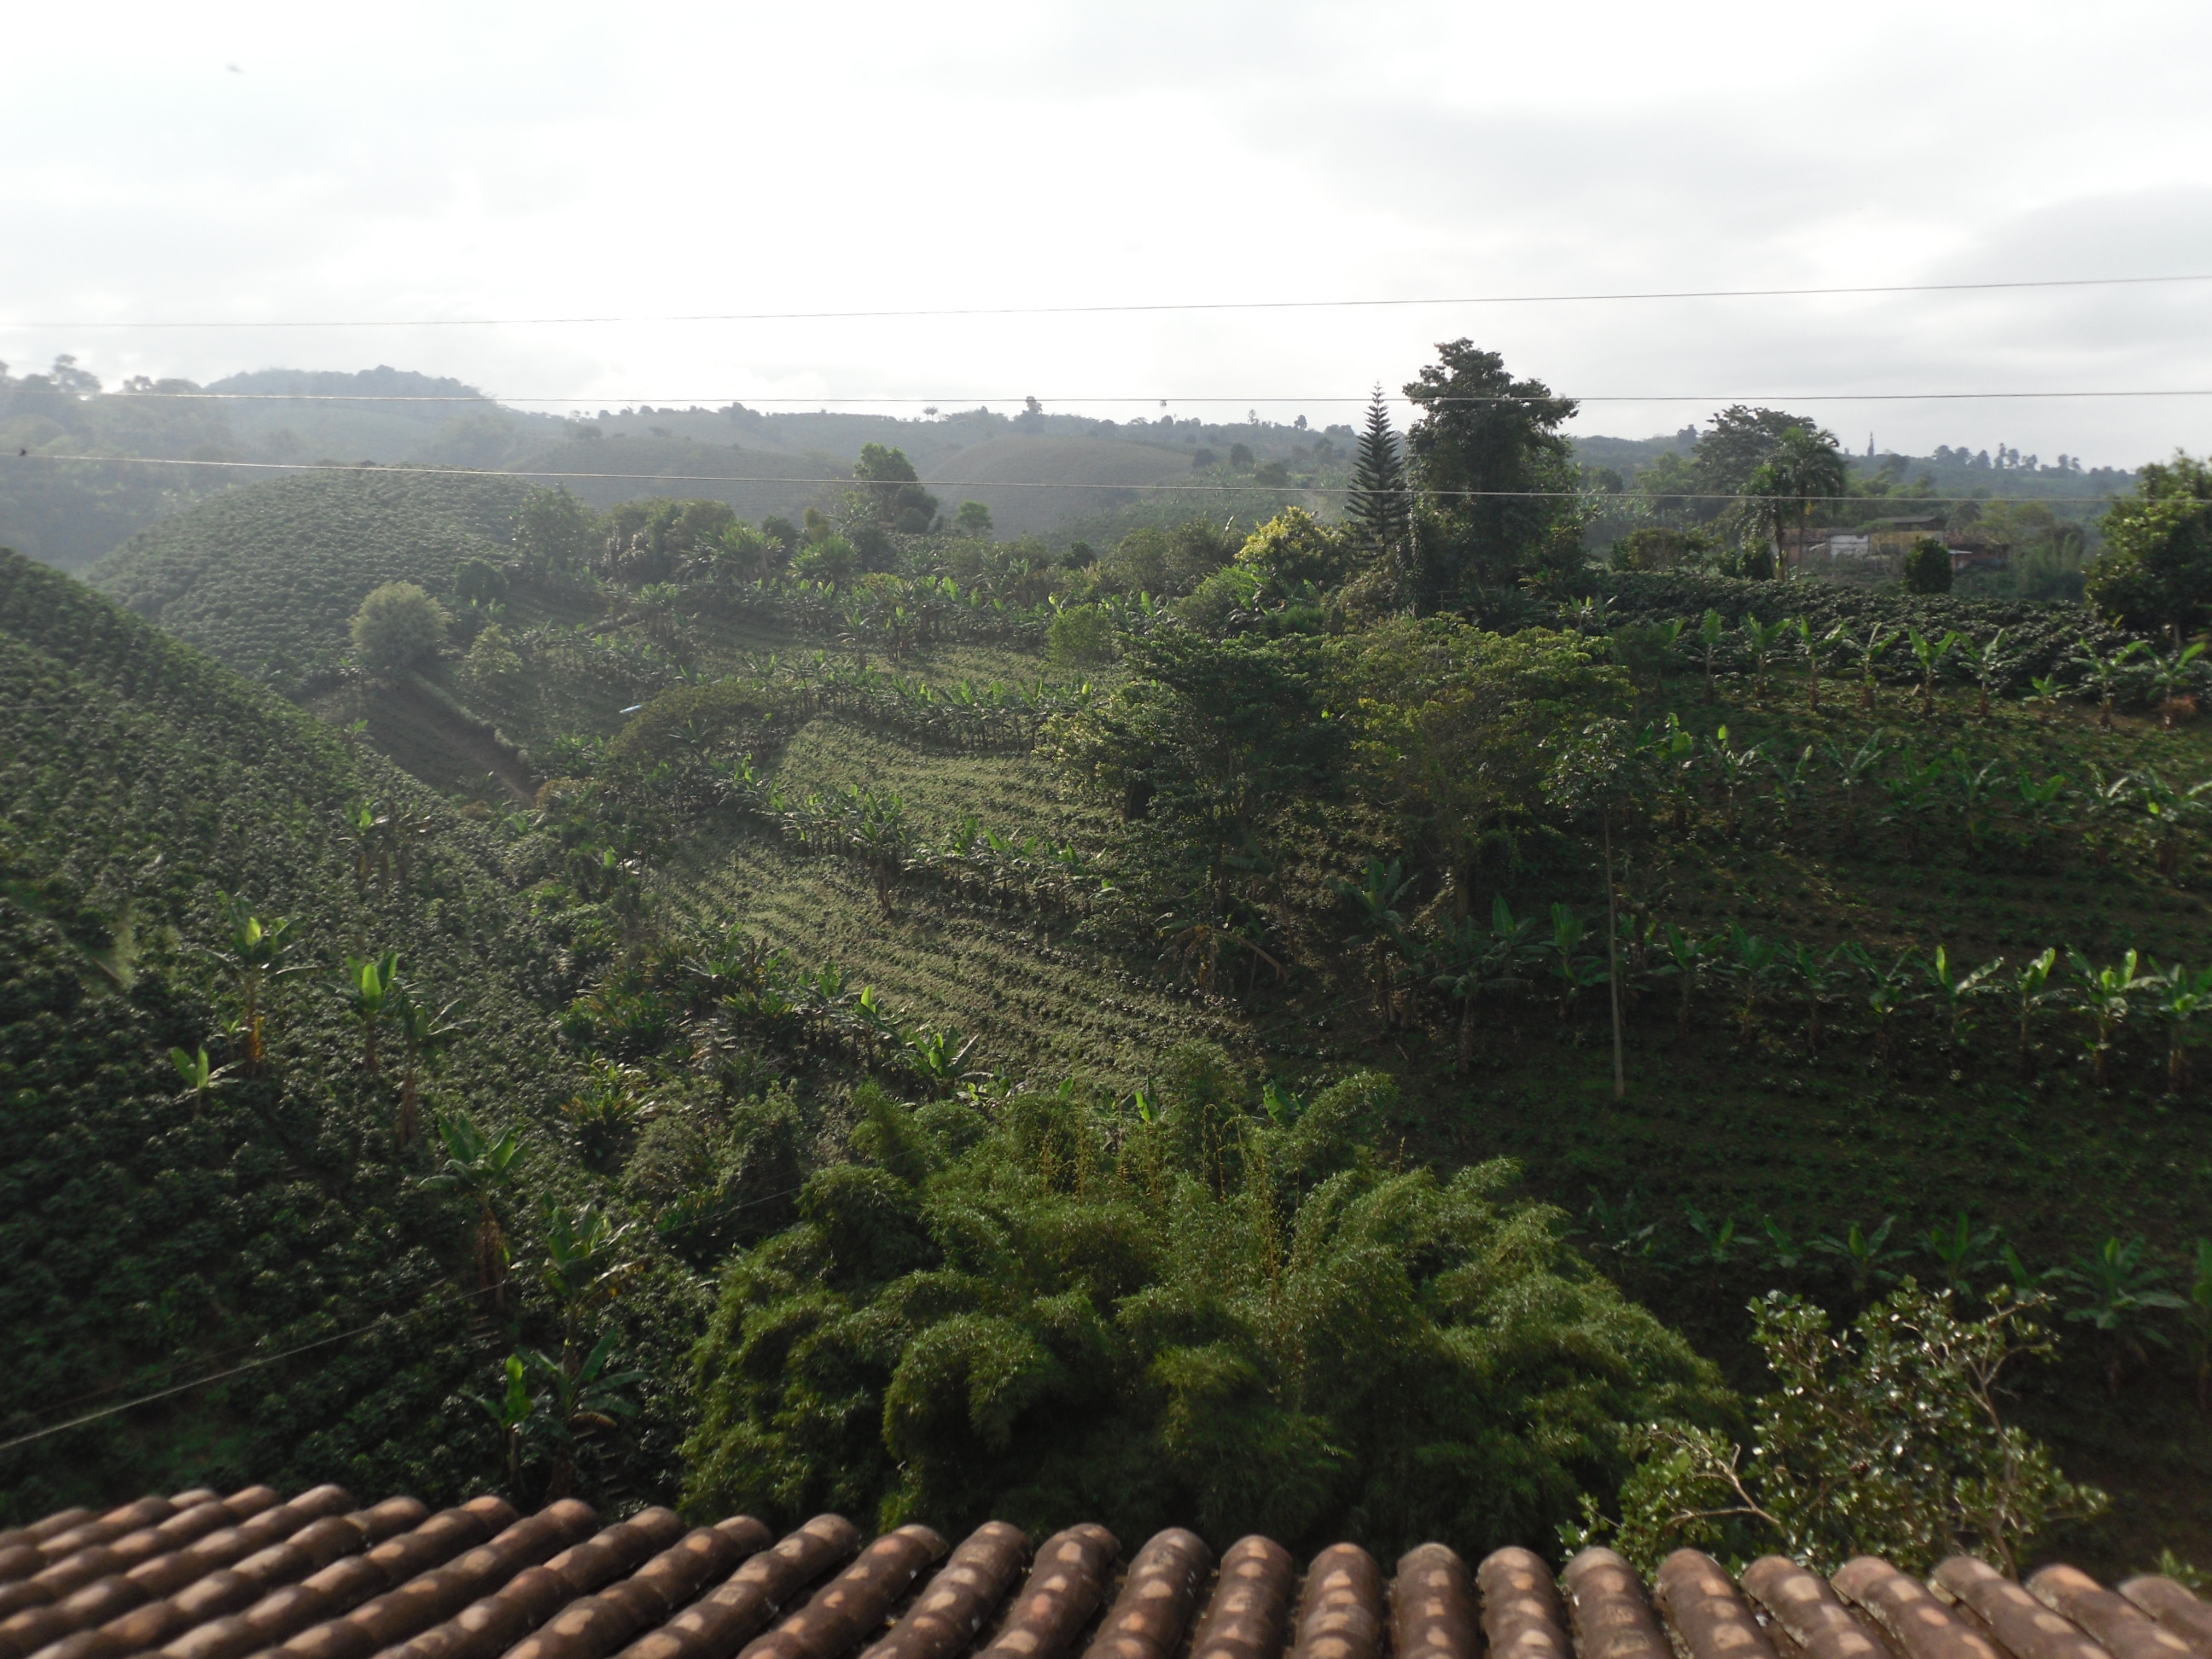 Colombia's famous Coffee Country